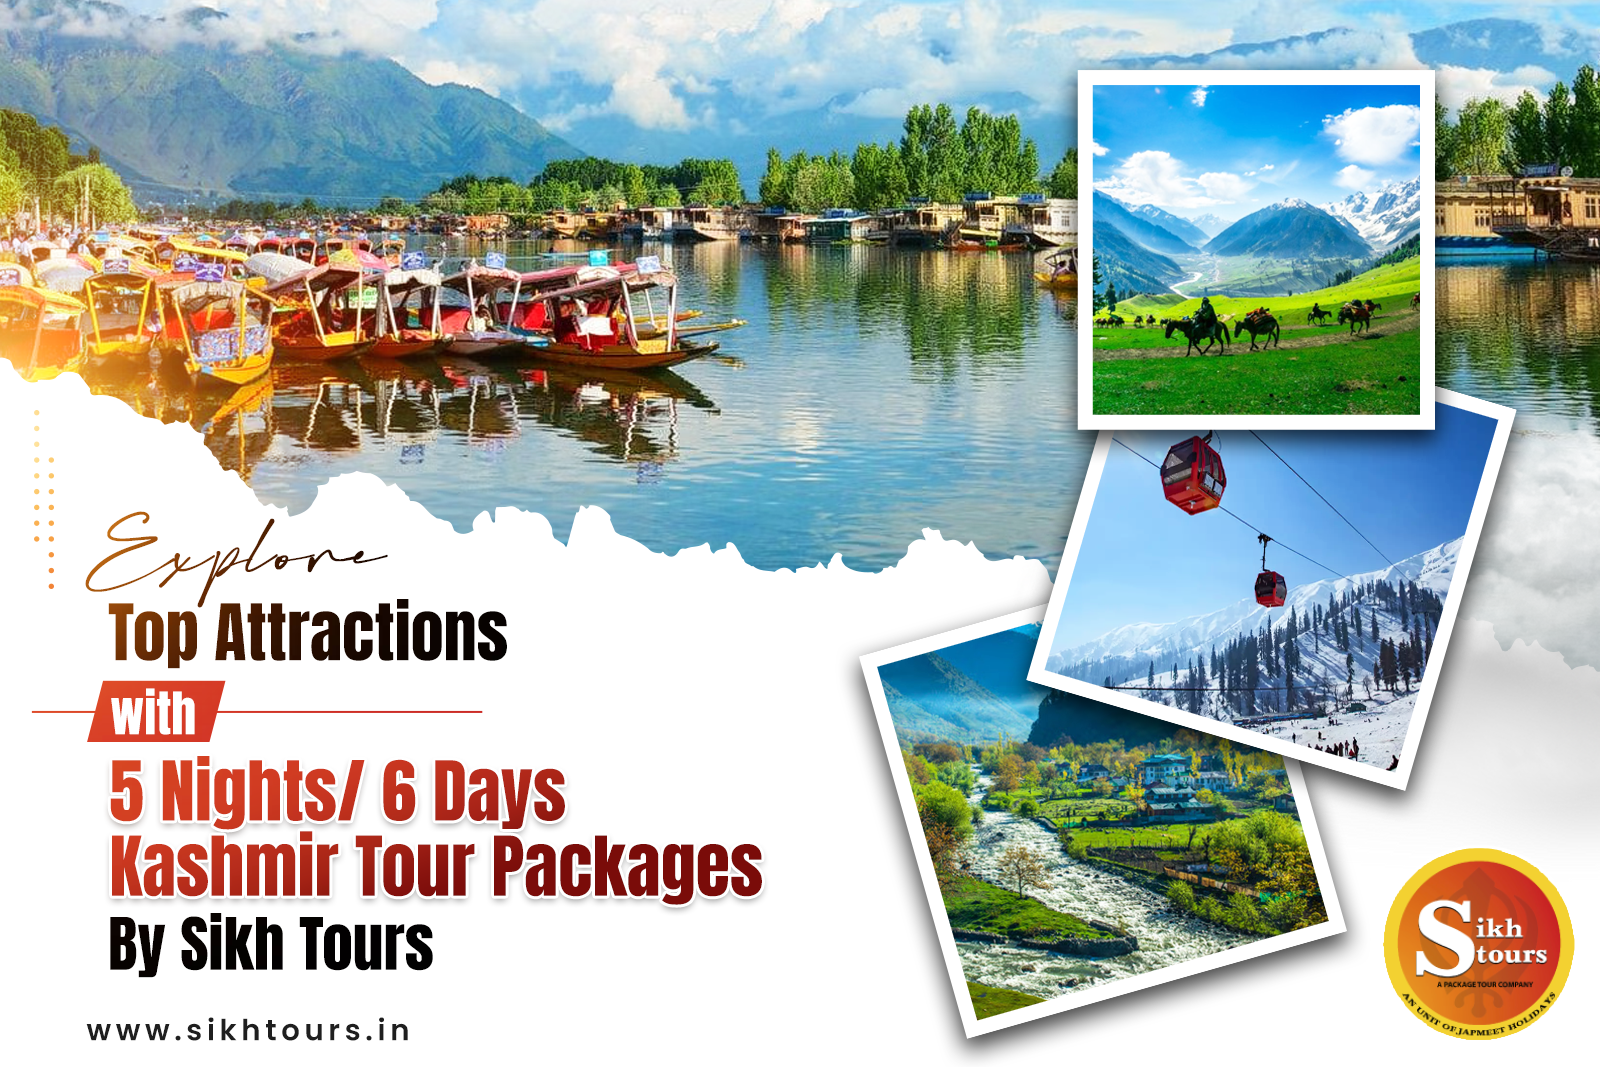 Explore Top Attractions With 5 Nights/6 Days Kashmir Tour Packages By Sikh Tours